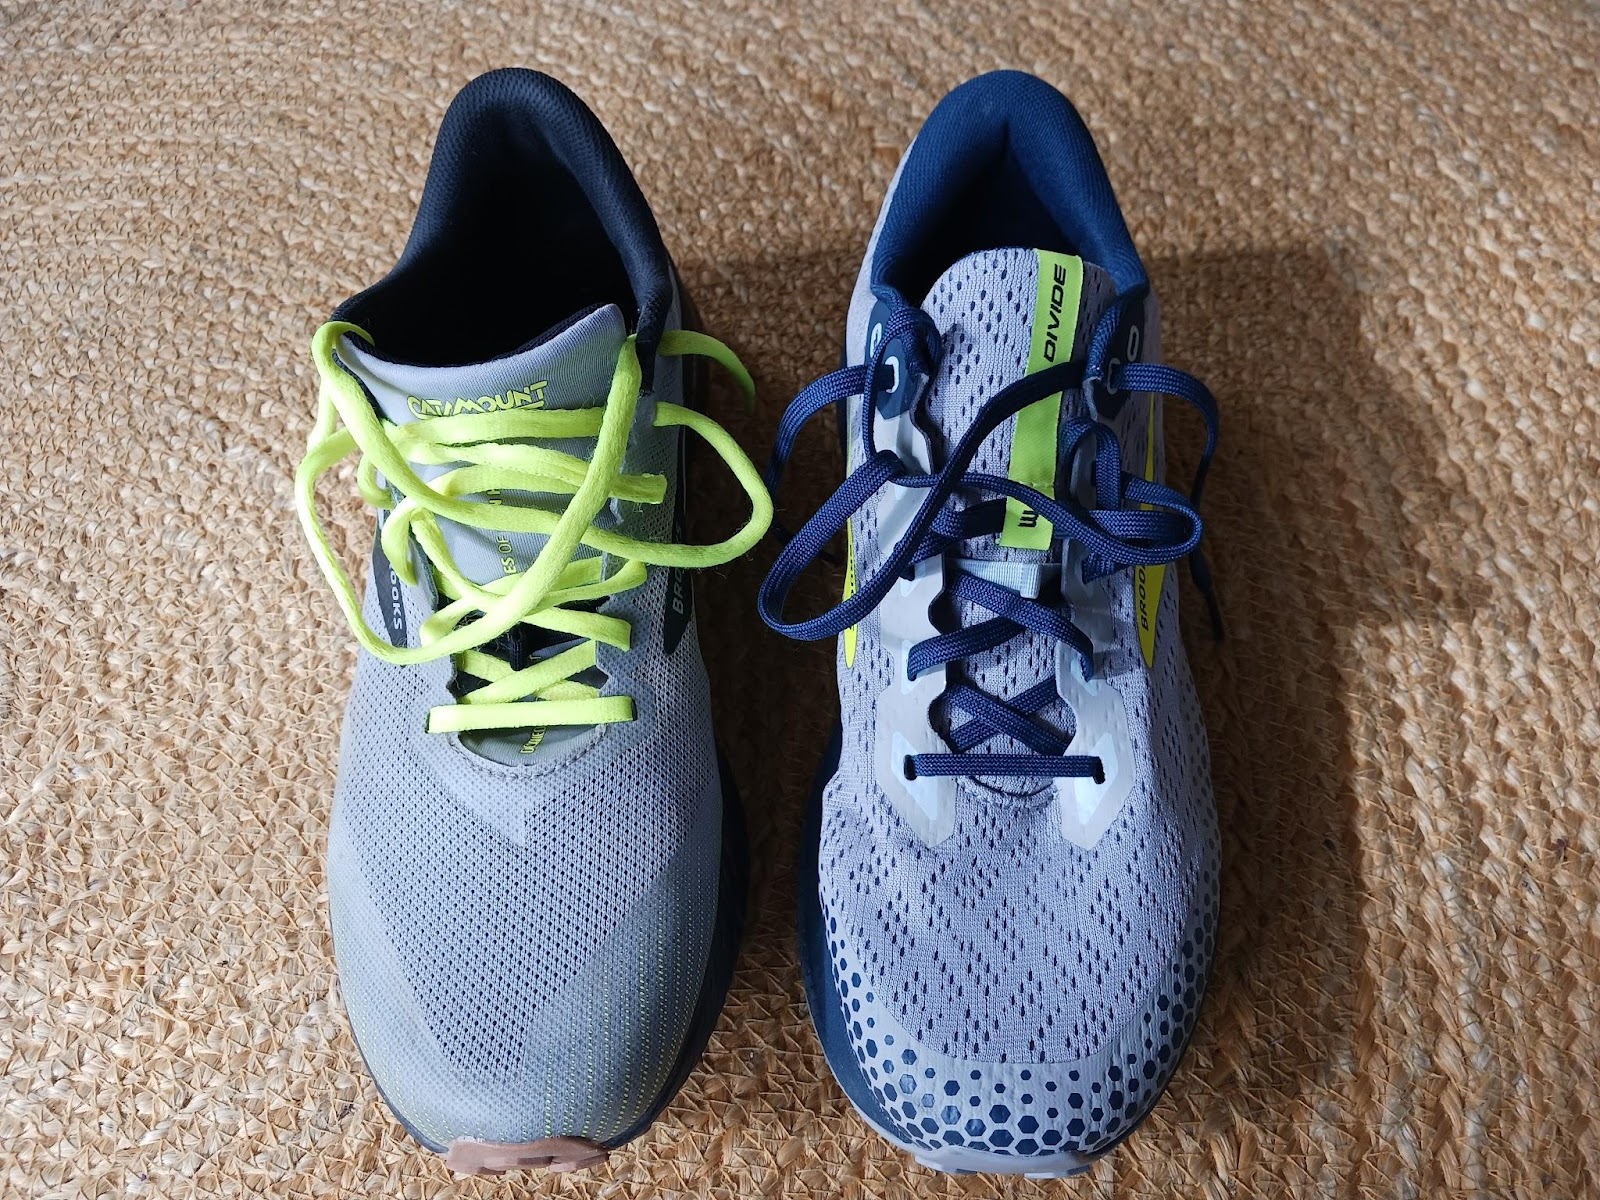 Road Trail Run: Brooks Running Divide 3 Multi Tester Review: No ...